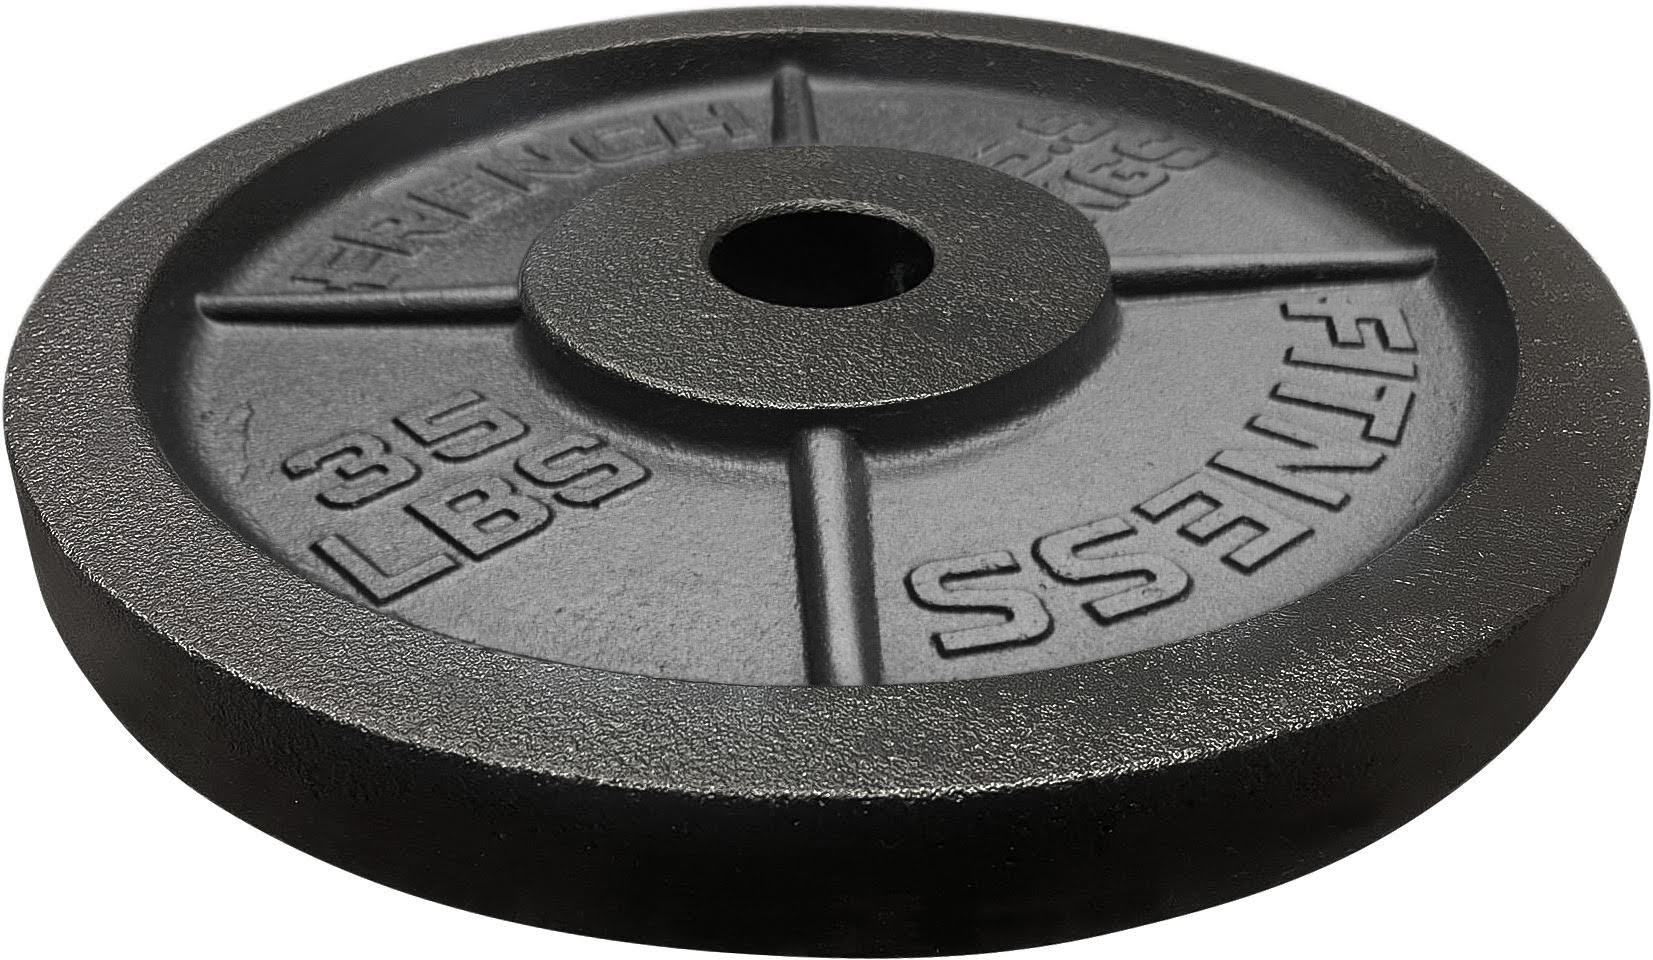 Solid Black Cast Iron Olympic Plates 